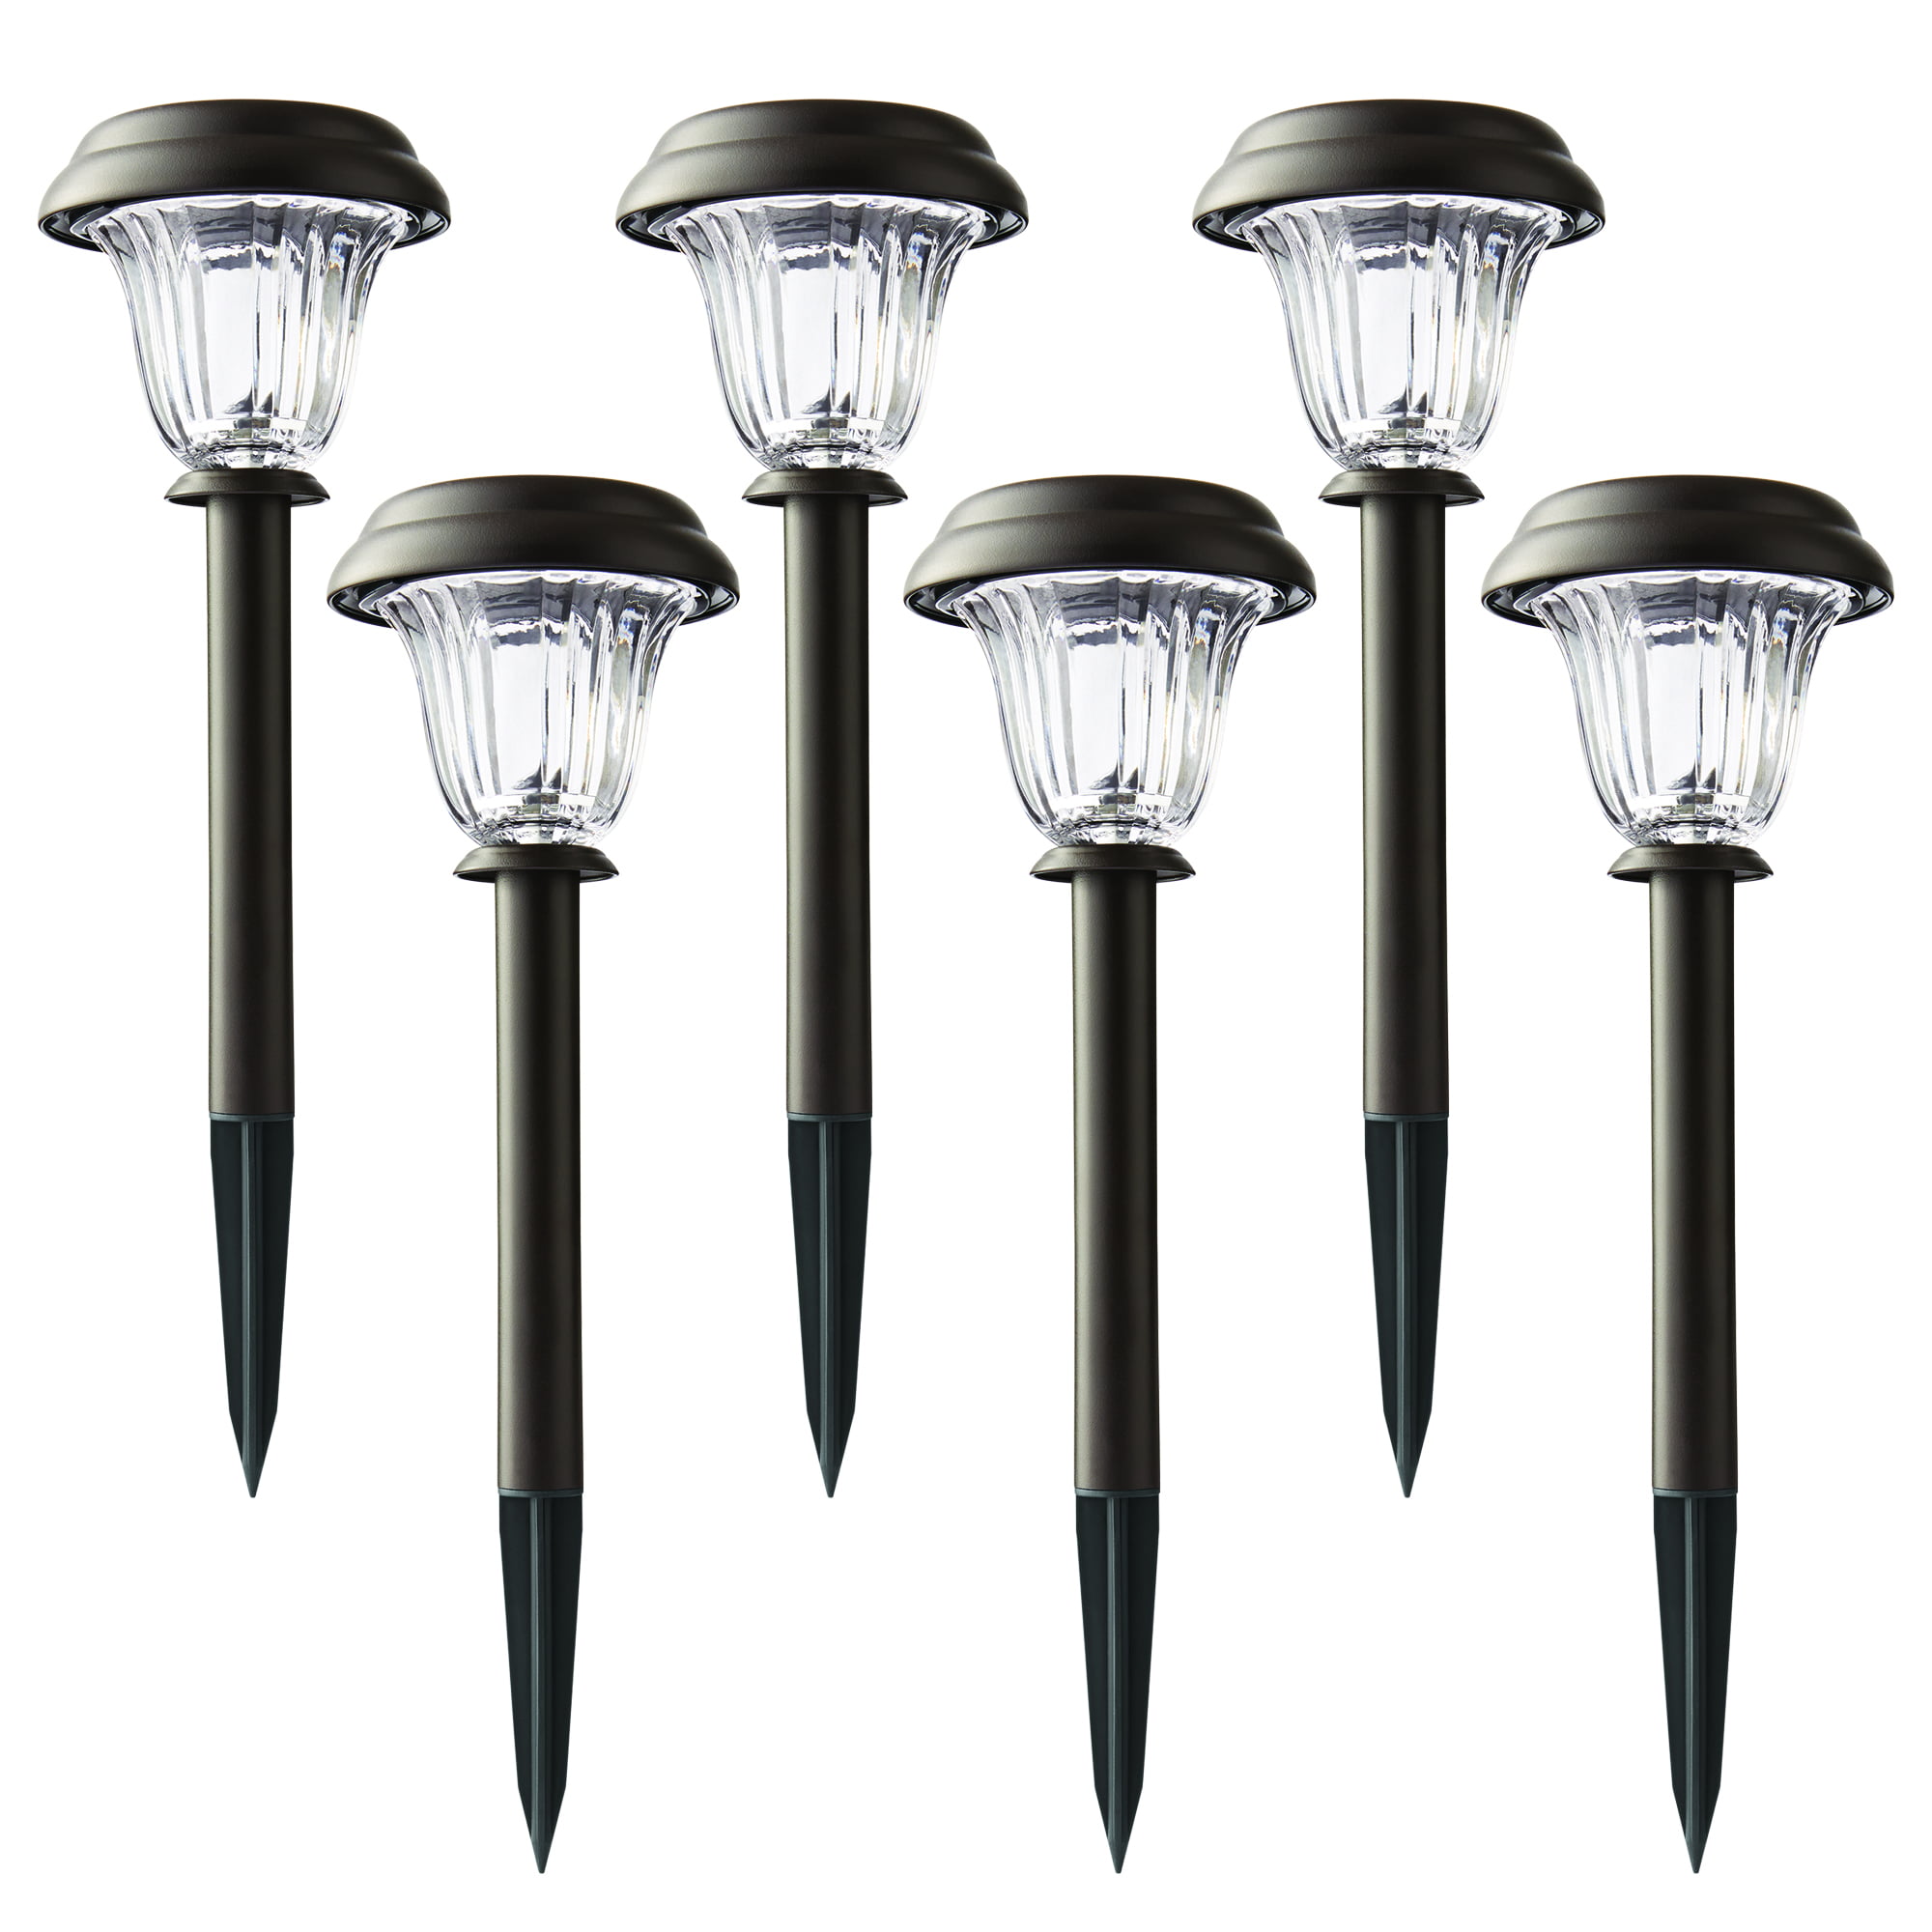 Solar Charcoal Brown Integrated LED Landscape Path Light Set 10-Pack Stainless